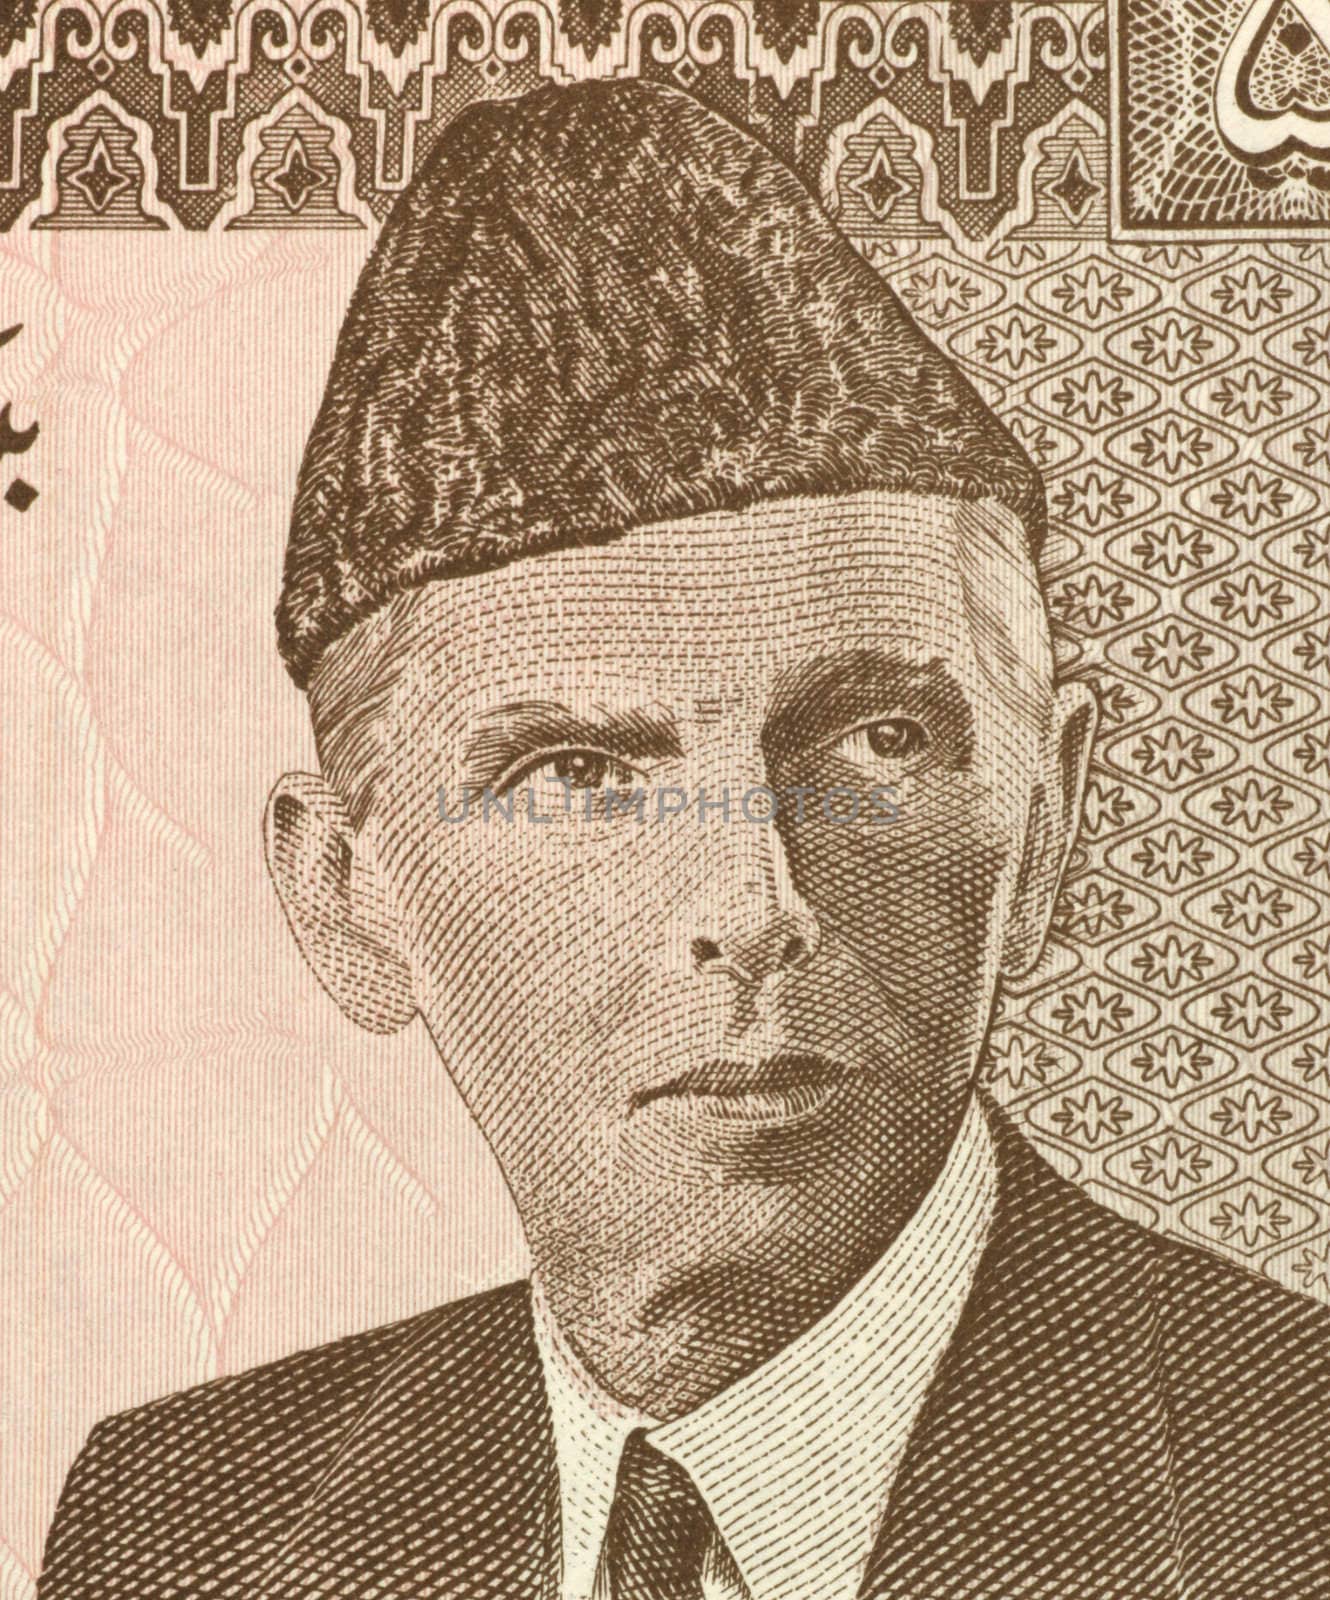 Mohammed Ali Jinnah (1876-1948) on 5 Rupees 1984 Banknote from Pakistan. Lawyer, politician, statesman  and founder of Pakistan.